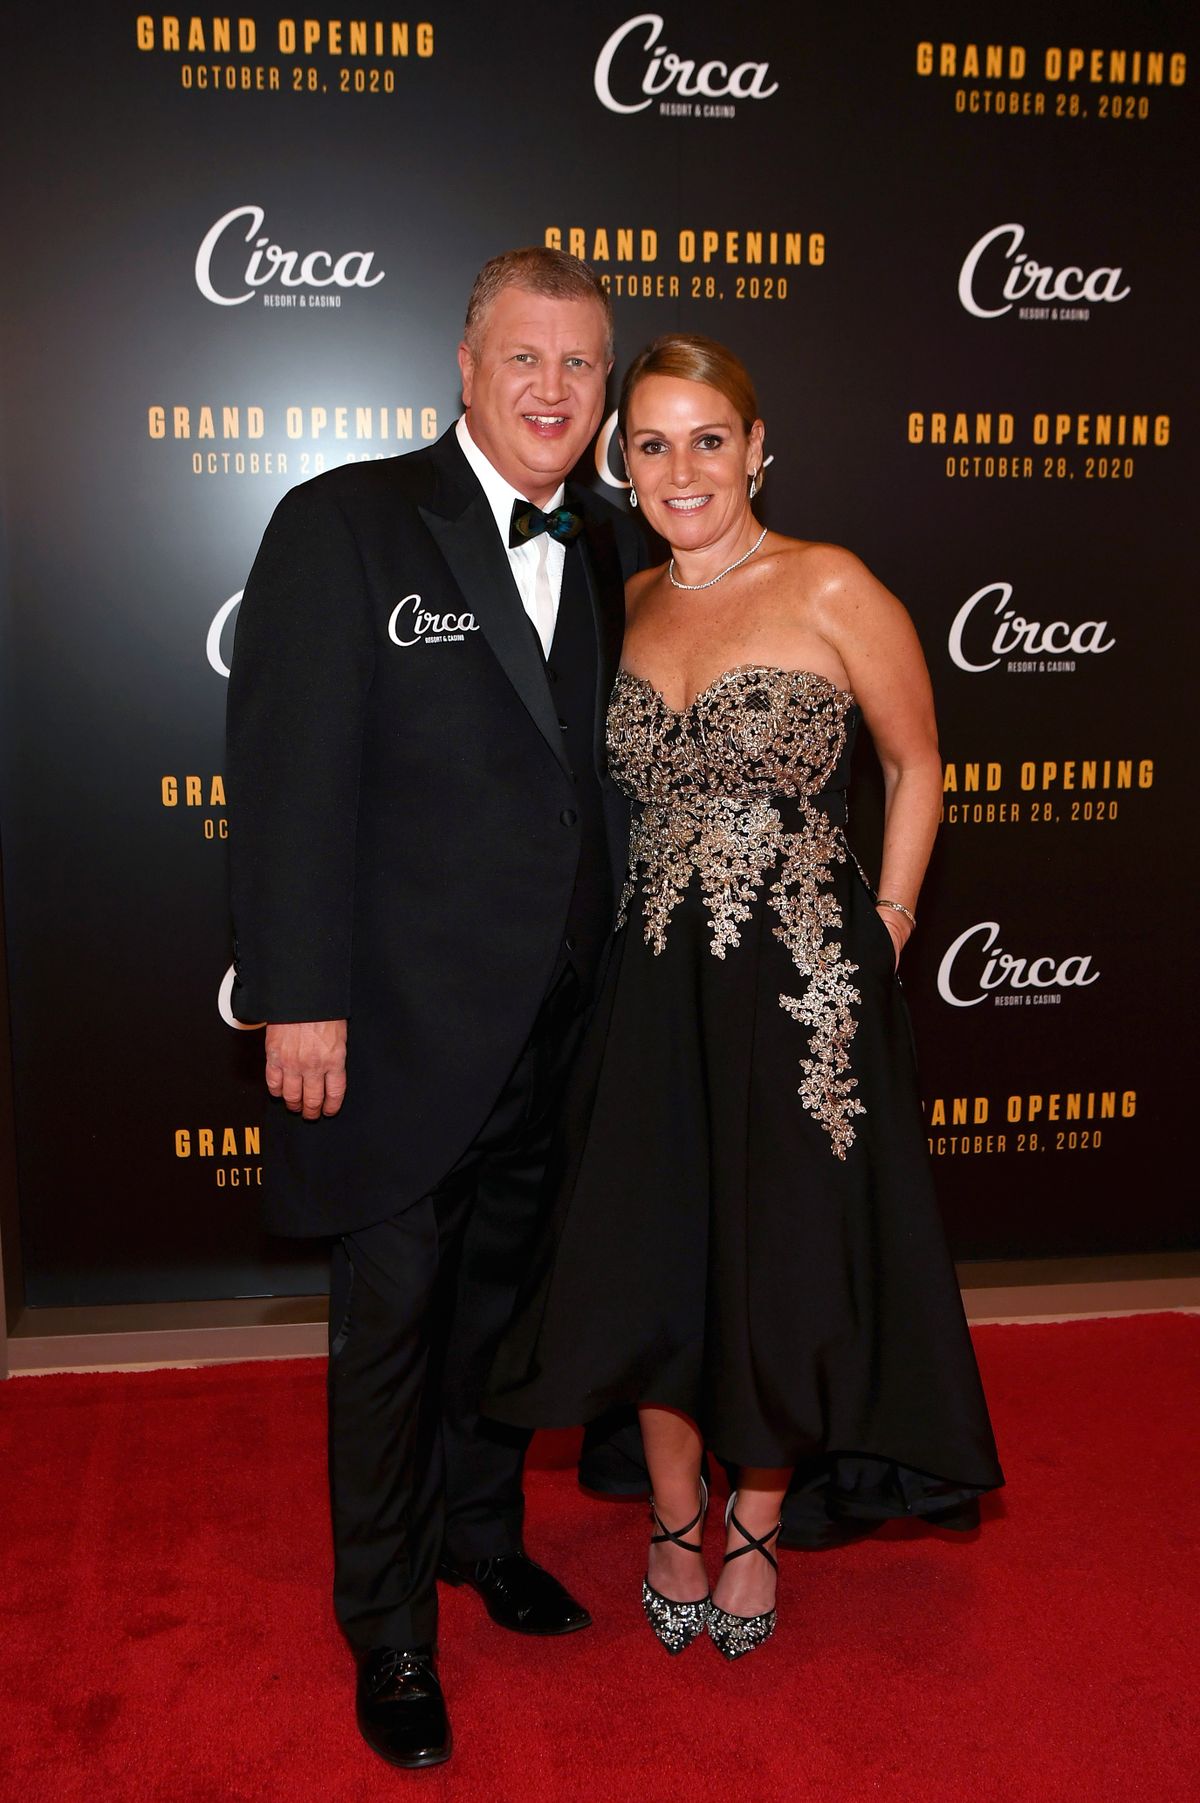 Circa Resort & Casino CEO Derek Stevens and his wife, Nicole Parthum, attend the grand opening of Circa Resort & Casino on Oct. 27 in downtown Las Vegas.  (Denise Truscello/Getty Images)